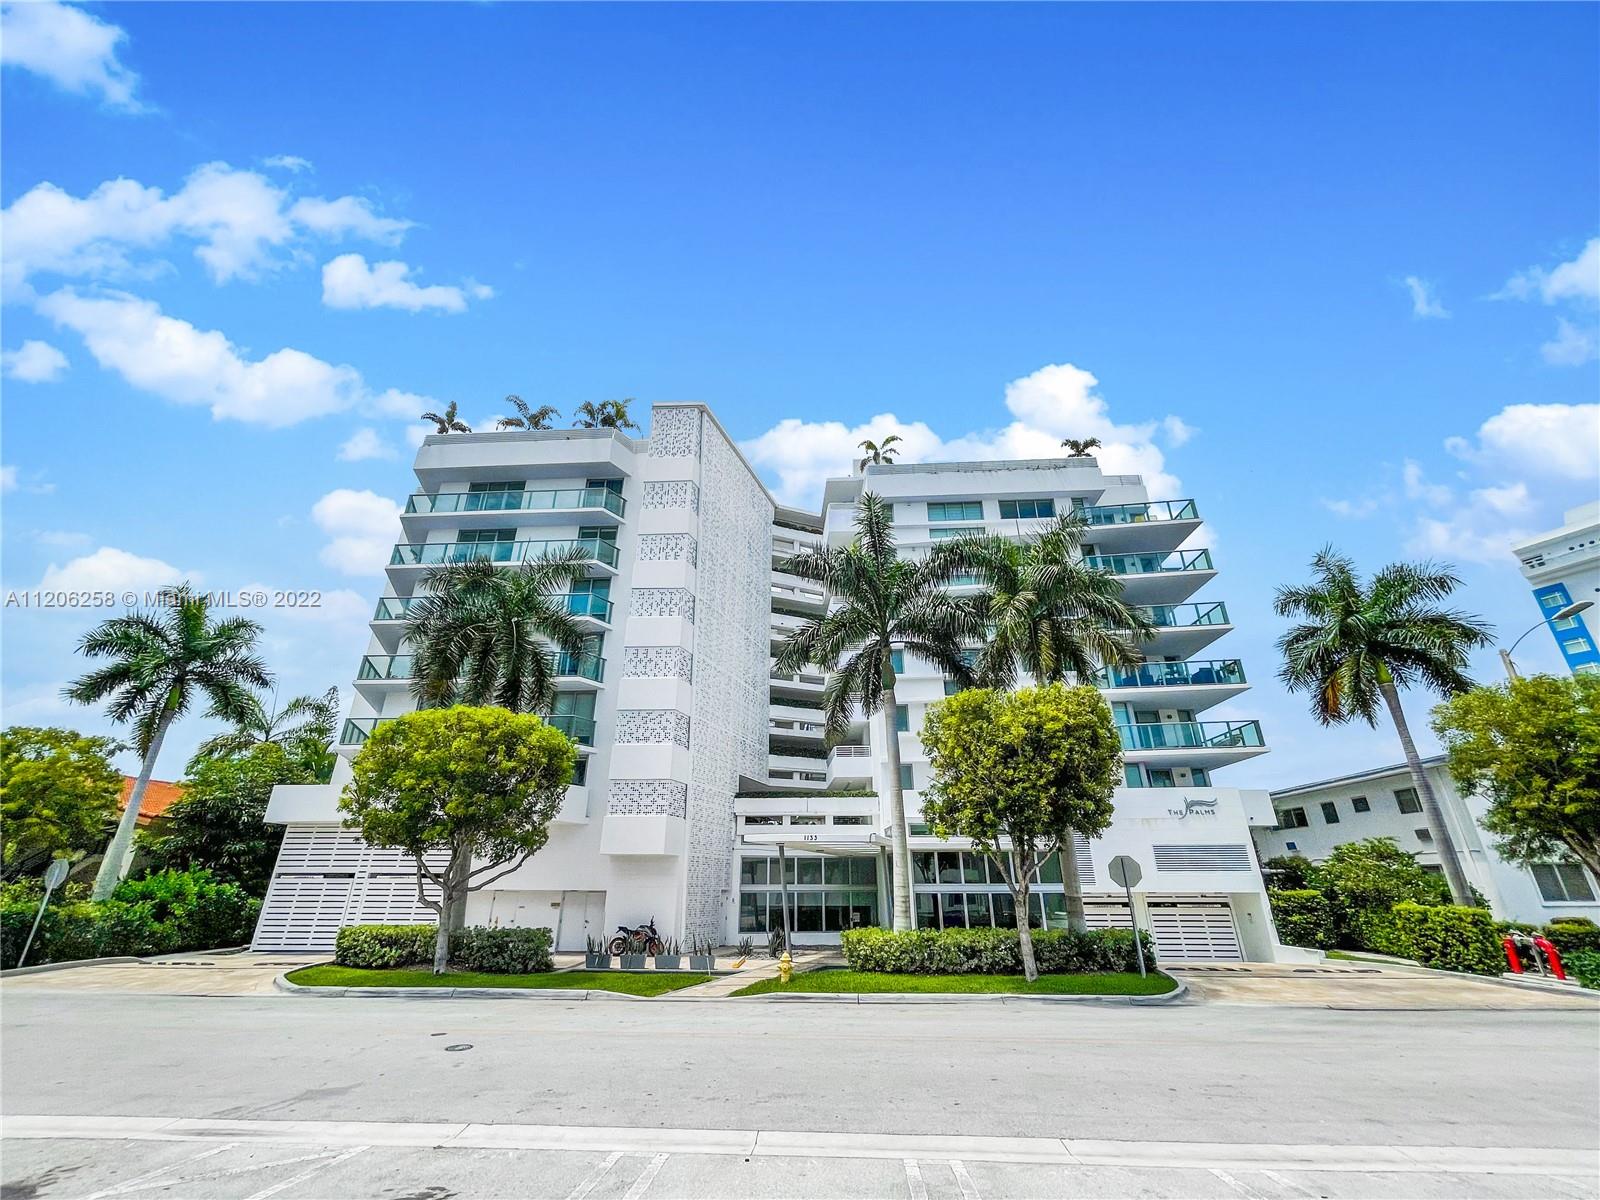 Boutique condo located in the heart of Bay Harbor Islands. This modern 3 bed/ 3 bath corner unit comes fully equipped, refrigerator, microwave, washer/dryer combo. Lots of natural light from floor to ceiling windows and sliding doors. Two covered parking spaces. Additional storage included. Fabulous rooftop deck featuring infinity pool, Jacuzzi, BBQ/ entertainment area. Blocks away from great A+public schools, Bal Harbour shops and beaches. Superb views from this magnificent 3/3 in paradisiac Bay Harbor Islands. Take advantage of this unique opportunity, rarely on the market.